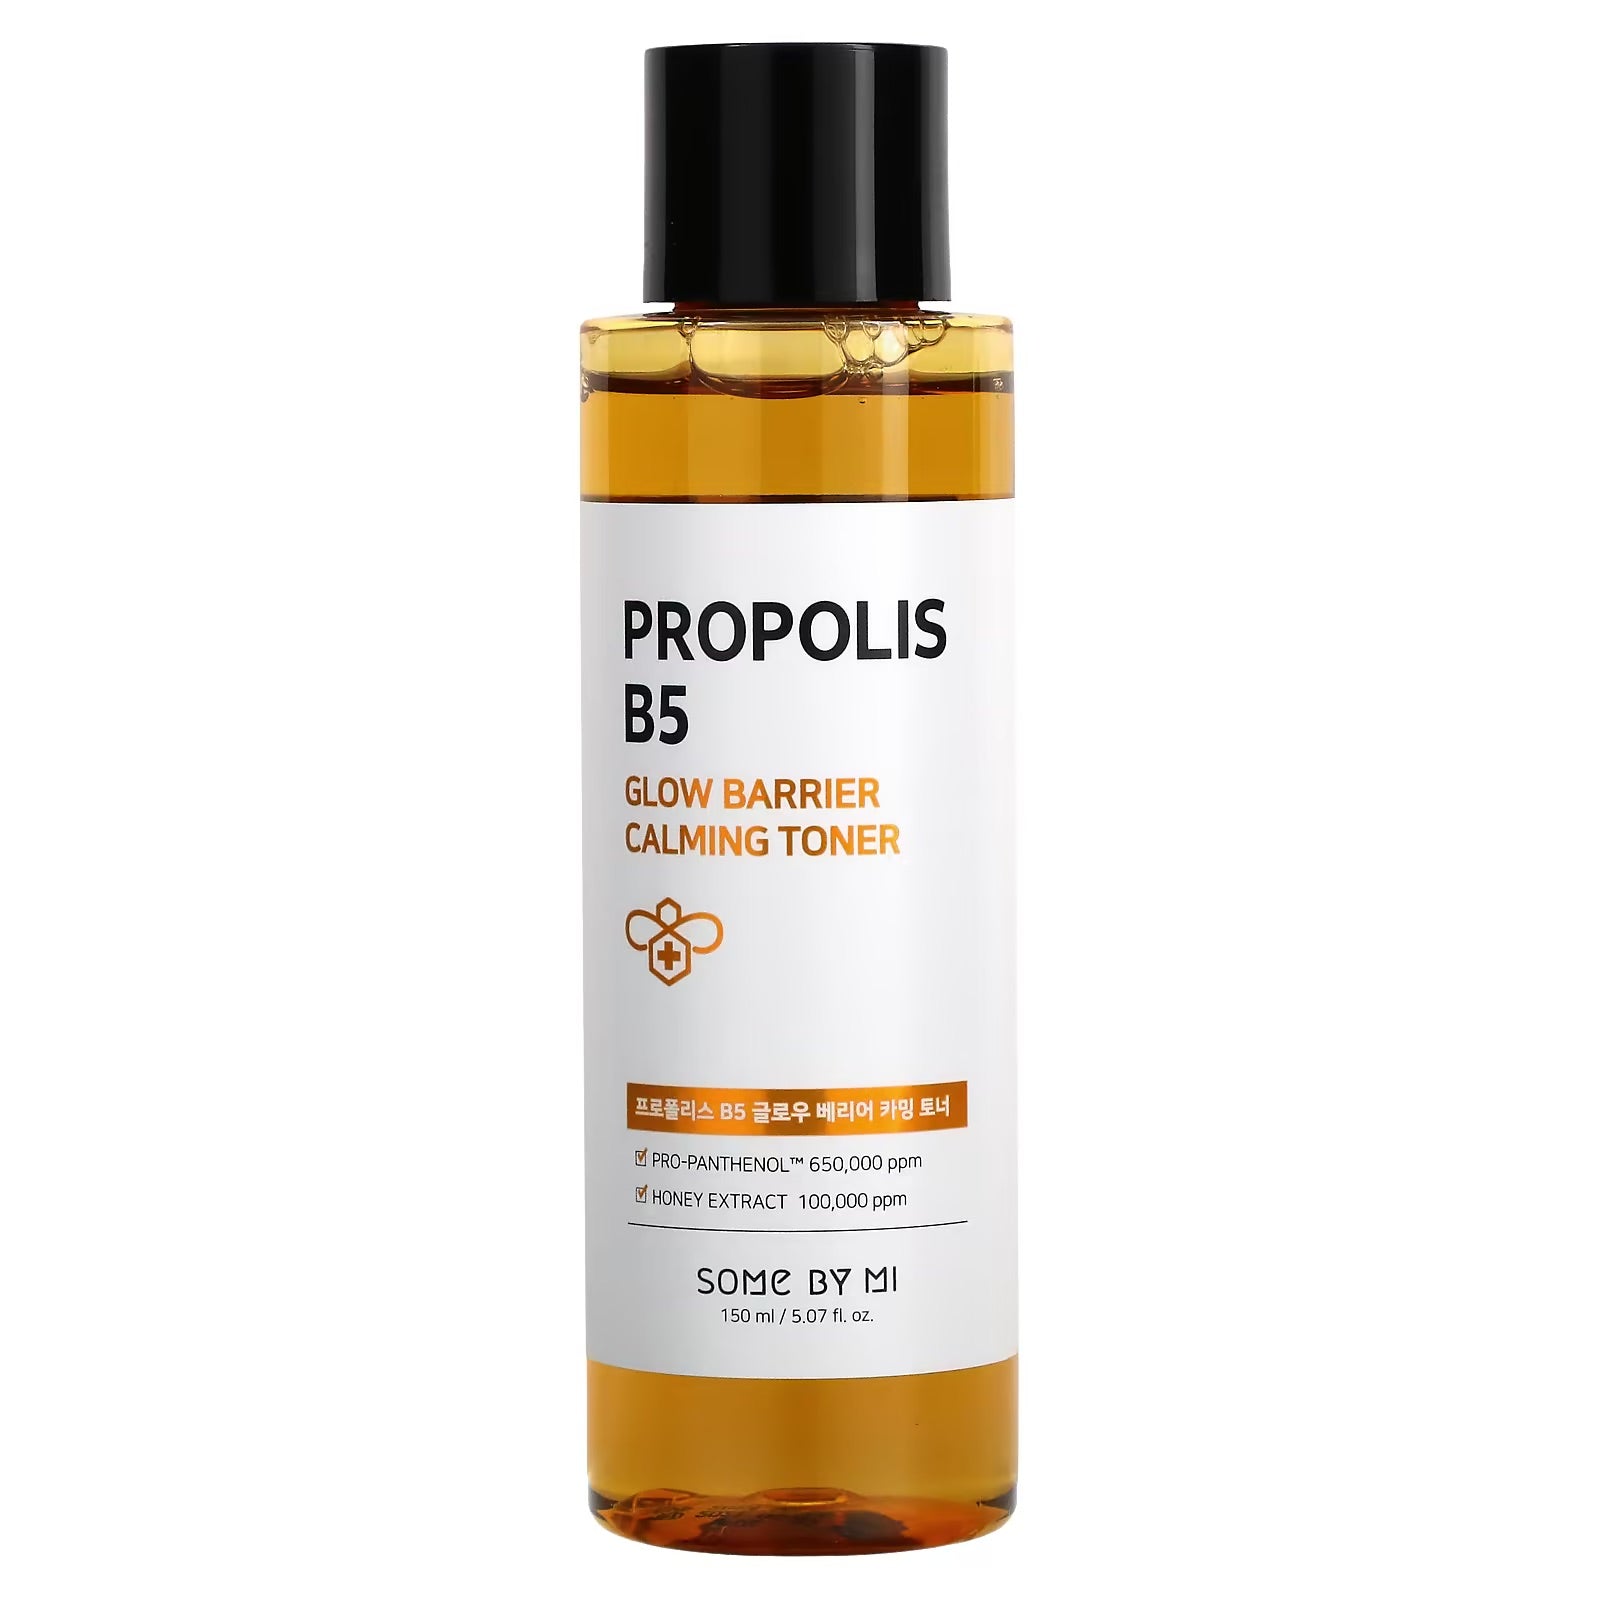 SOME BY MI Propoulis B5 Glow Barrier Calming Toner